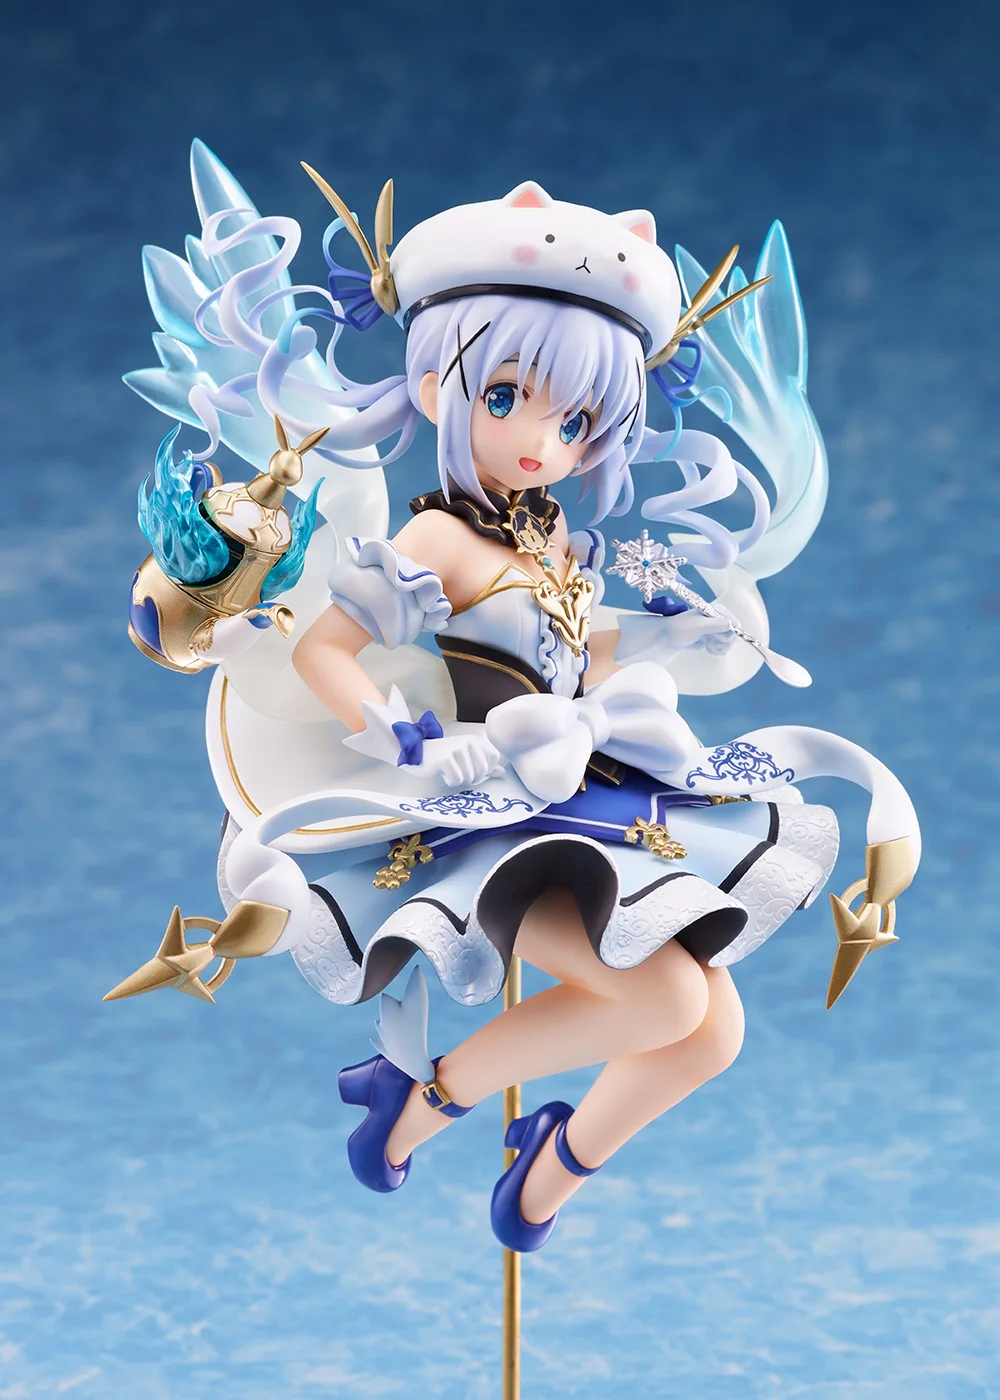 

Is the order a rabbit Kafuu Chino magician VER. 22cm PVC Action Figure Anime Figure Model Toys Figure Collection Doll Gift